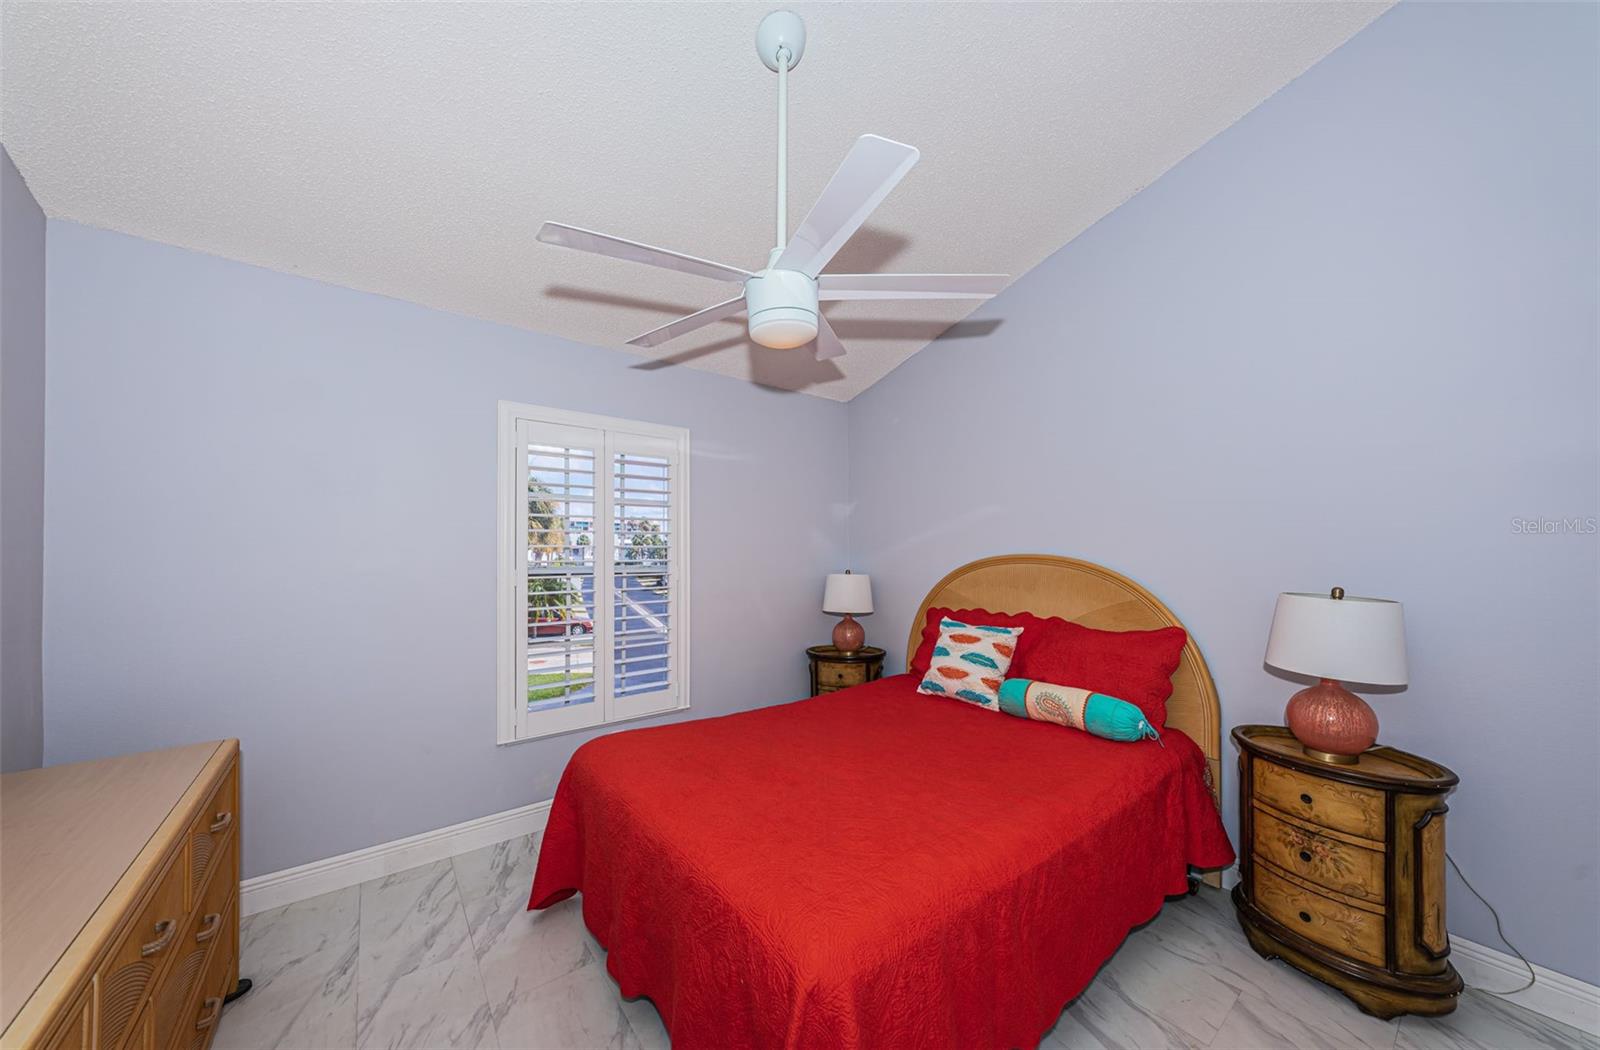 Guest bedroom has cathedral ceilings and plantation shutters.